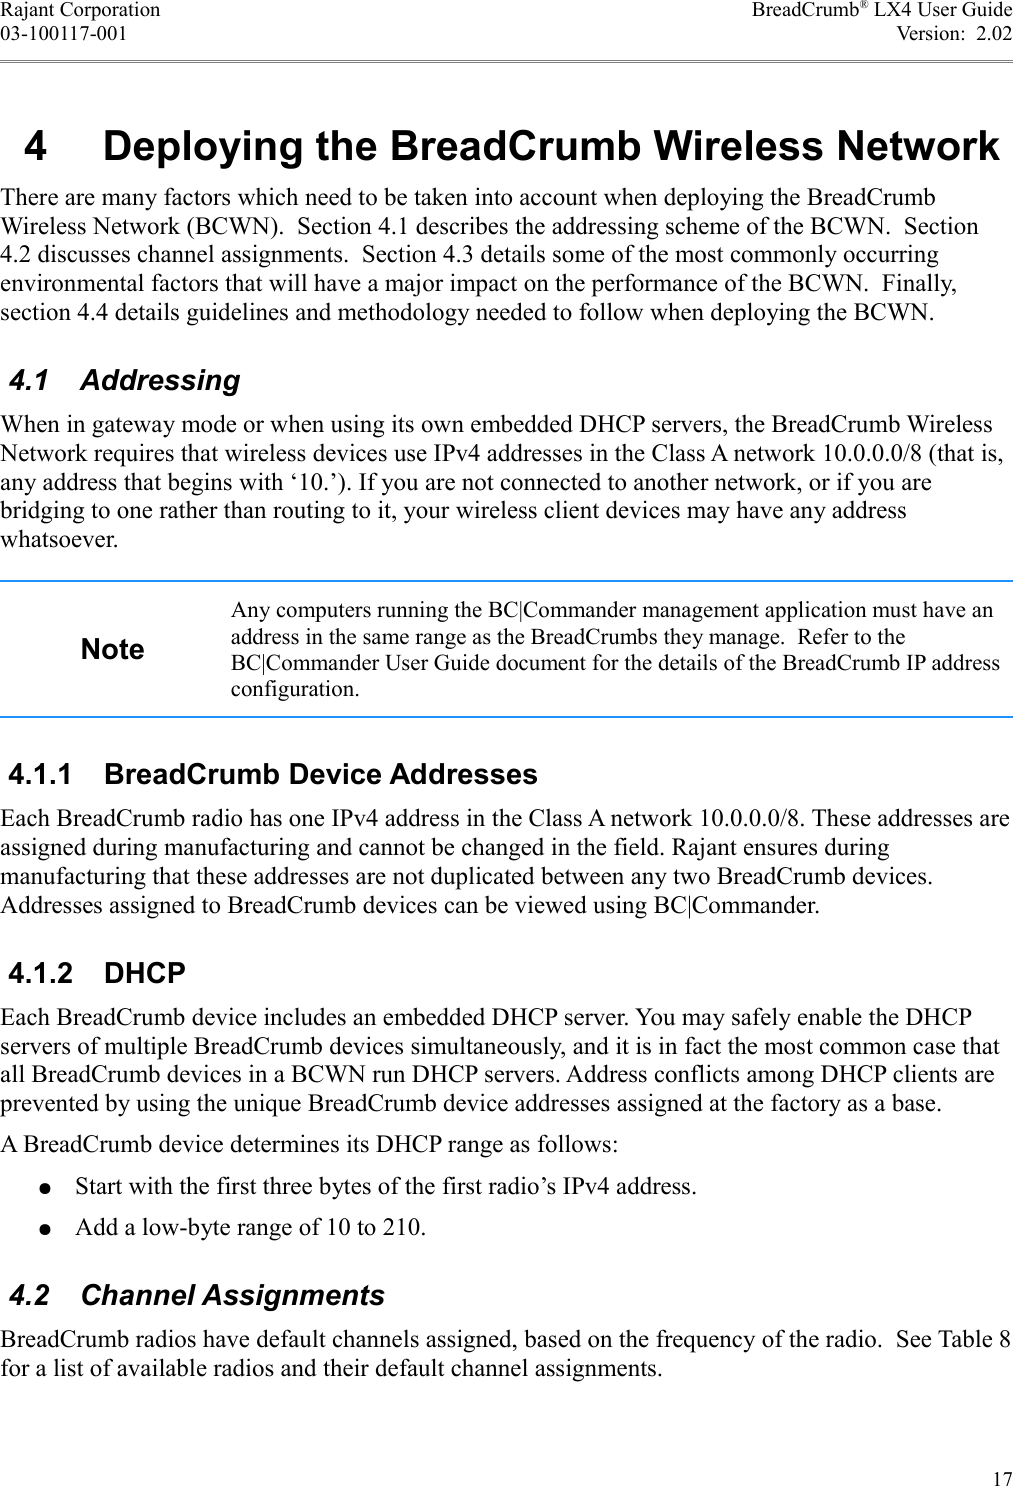 Rajant Corporation BreadCrumb® LX4 User Guide03-100117-001 Version:  2.02 4  Deploying the BreadCrumb Wireless NetworkThere are many factors which need to be taken into account when deploying the BreadCrumb Wireless Network (BCWN).  Section 4.1 describes the addressing scheme of the BCWN.  Section 4.2 discusses channel assignments.  Section 4.3 details some of the most commonly occurring environmental factors that will have a major impact on the performance of the BCWN.  Finally, section 4.4 details guidelines and methodology needed to follow when deploying the BCWN. 4.1  AddressingWhen in gateway mode or when using its own embedded DHCP servers, the BreadCrumb Wireless Network requires that wireless devices use IPv4 addresses in the Class A network 10.0.0.0/8 (that is, any address that begins with ‘10.’). If you are not connected to another network, or if you are bridging to one rather than routing to it, your wireless client devices may have any address whatsoever.NoteAny computers running the BC|Commander management application must have an address in the same range as the BreadCrumbs they manage.  Refer to the BC|Commander User Guide document for the details of the BreadCrumb IP address configuration. 4.1.1  BreadCrumb Device AddressesEach BreadCrumb radio has one IPv4 address in the Class A network 10.0.0.0/8. These addresses are assigned during manufacturing and cannot be changed in the field. Rajant ensures during manufacturing that these addresses are not duplicated between any two BreadCrumb devices. Addresses assigned to BreadCrumb devices can be viewed using BC|Commander. 4.1.2  DHCPEach BreadCrumb device includes an embedded DHCP server. You may safely enable the DHCP servers of multiple BreadCrumb devices simultaneously, and it is in fact the most common case that all BreadCrumb devices in a BCWN run DHCP servers. Address conflicts among DHCP clients are prevented by using the unique BreadCrumb device addresses assigned at the factory as a base.A BreadCrumb device determines its DHCP range as follows:●Start with the first three bytes of the first radio’s IPv4 address.●Add a low-byte range of 10 to 210. 4.2  Channel AssignmentsBreadCrumb radios have default channels assigned, based on the frequency of the radio.  See Table 8 for a list of available radios and their default channel assignments.17